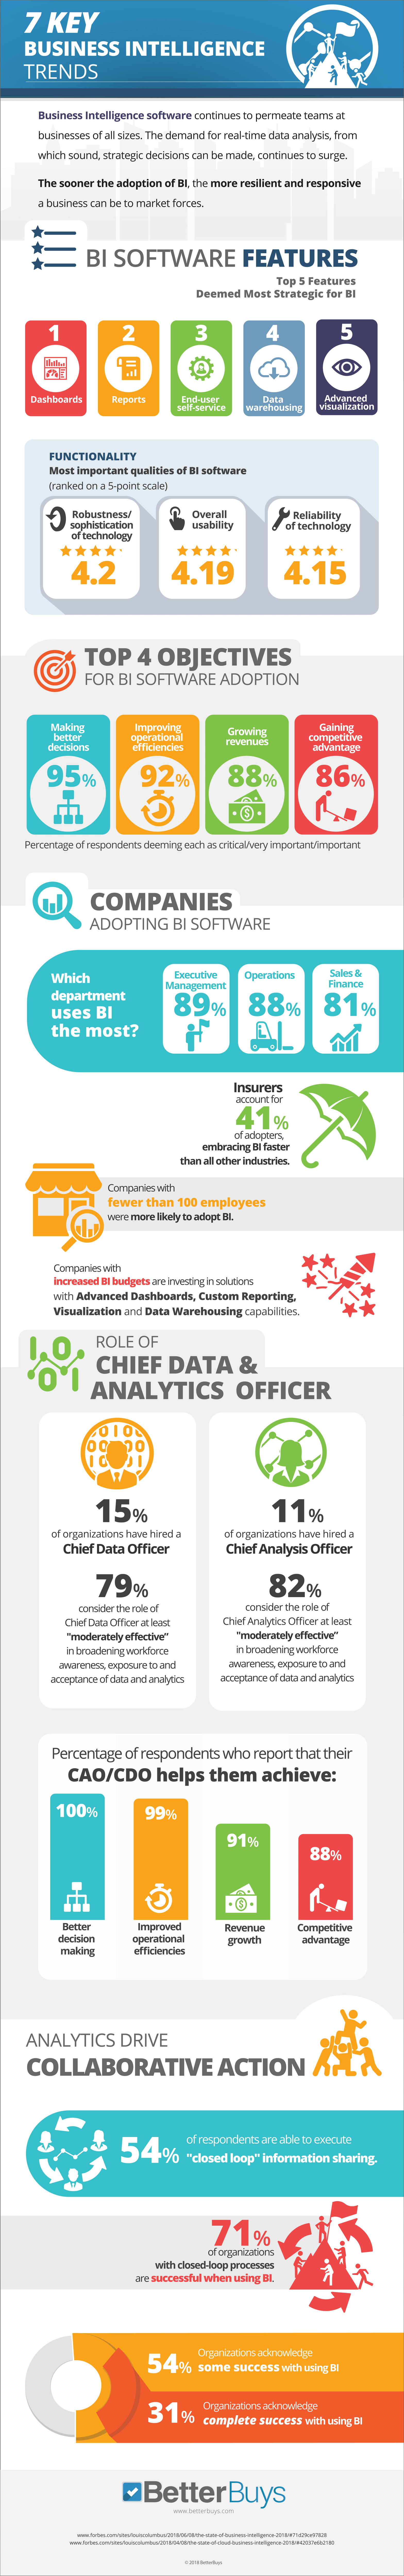 Business Intelligence Trends Infographic